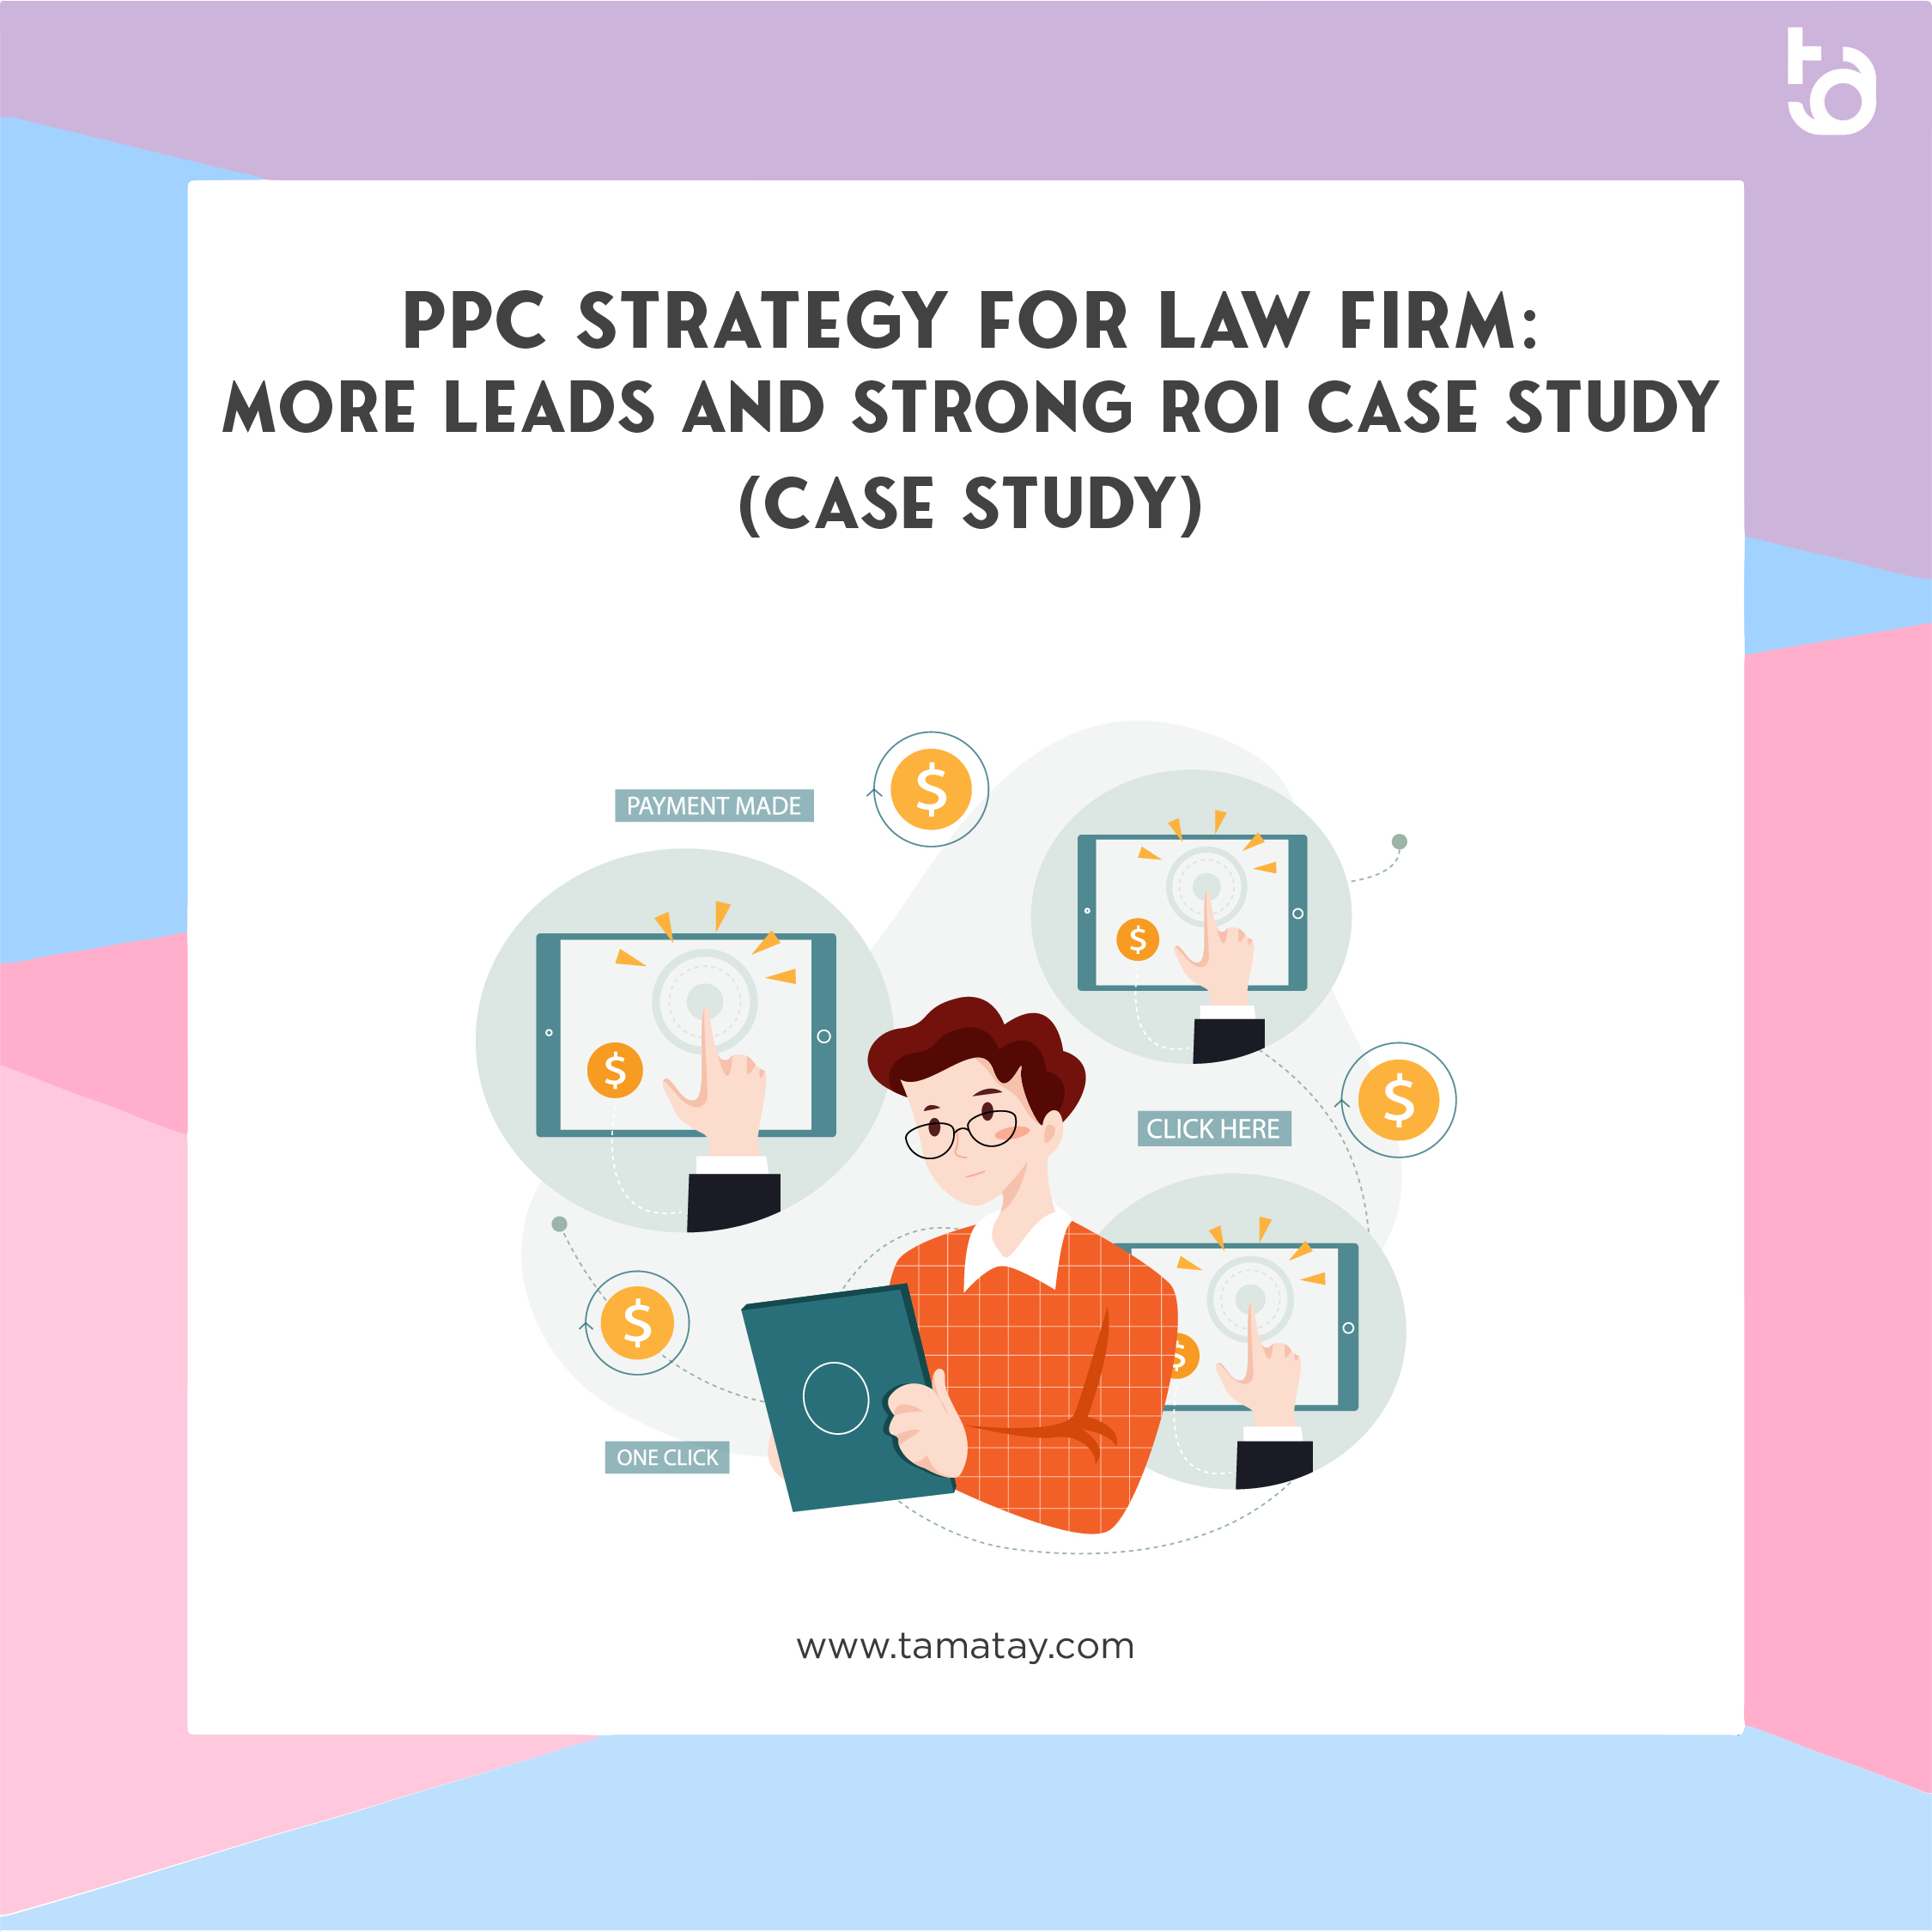 Driving More Leads and Achieving Strong ROI through Comprehensive PPC Strategy: A Case Study for a Personal Injury Law Firm